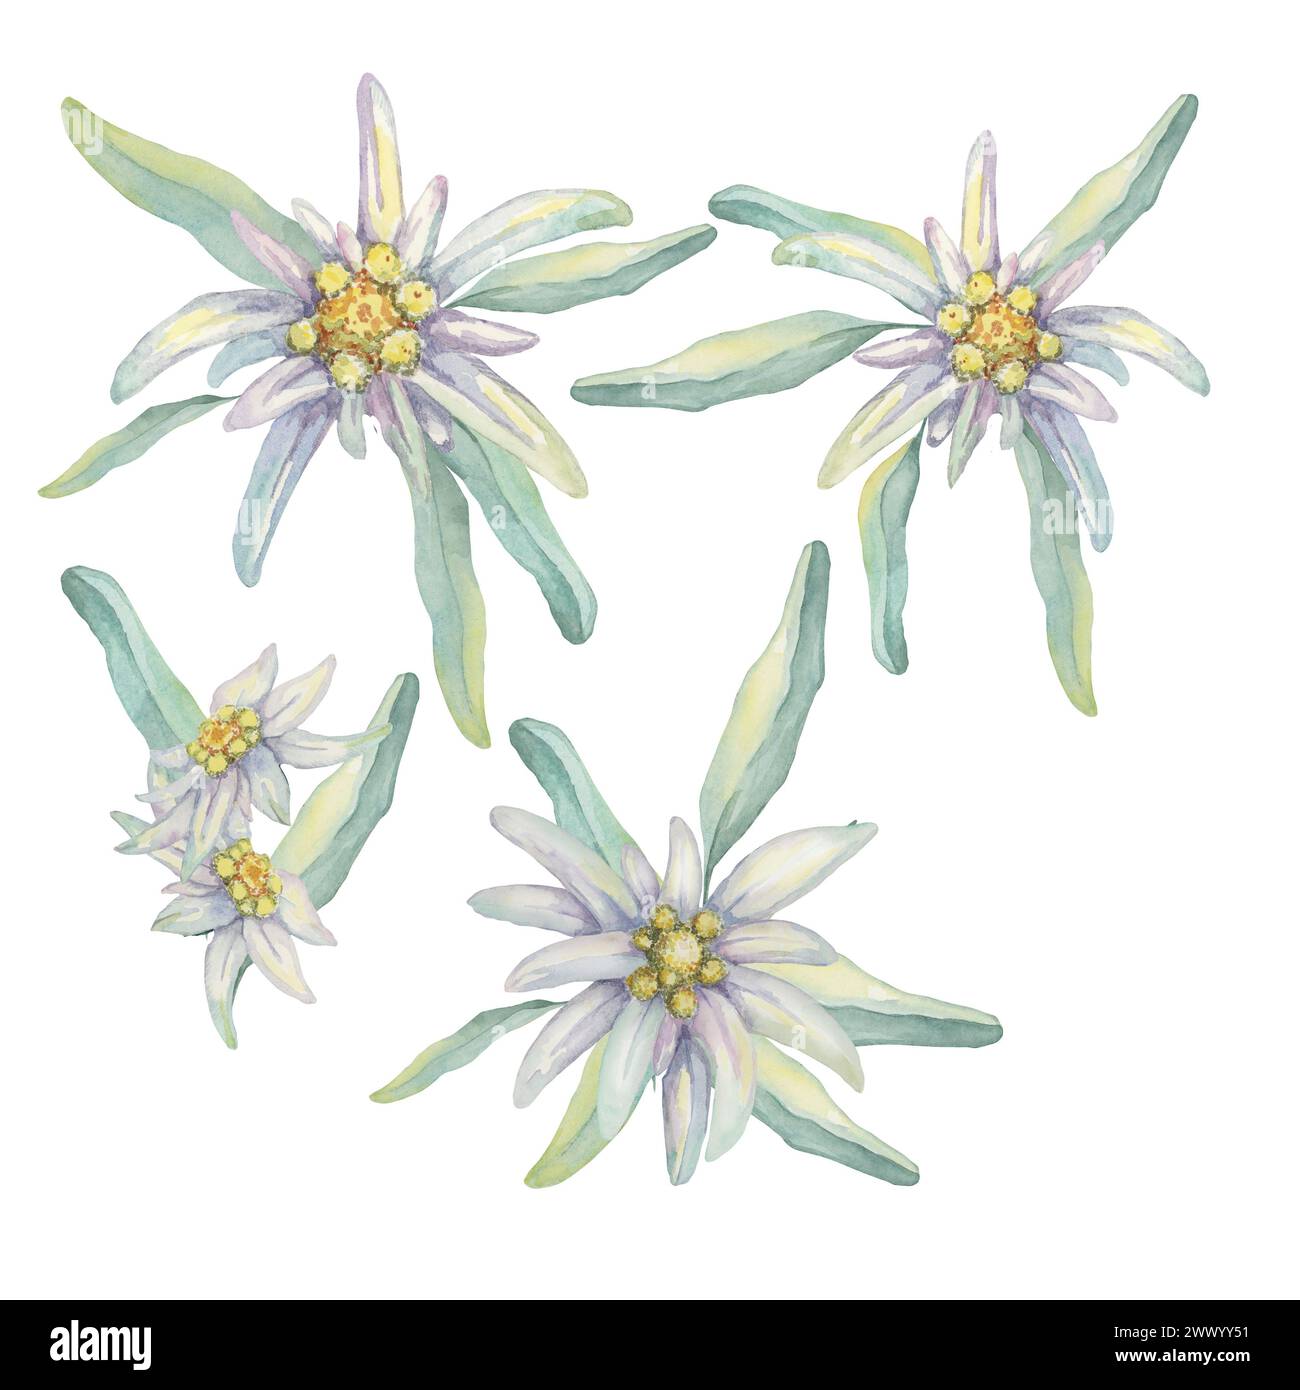 Edelweiss clipart set. Watercolor illustration of wildflowers and leaves. Leontopodium nivale hand drawn artwork isolated on white background. Design for printing, cards, apparel, stickers, wall art Stock Photo